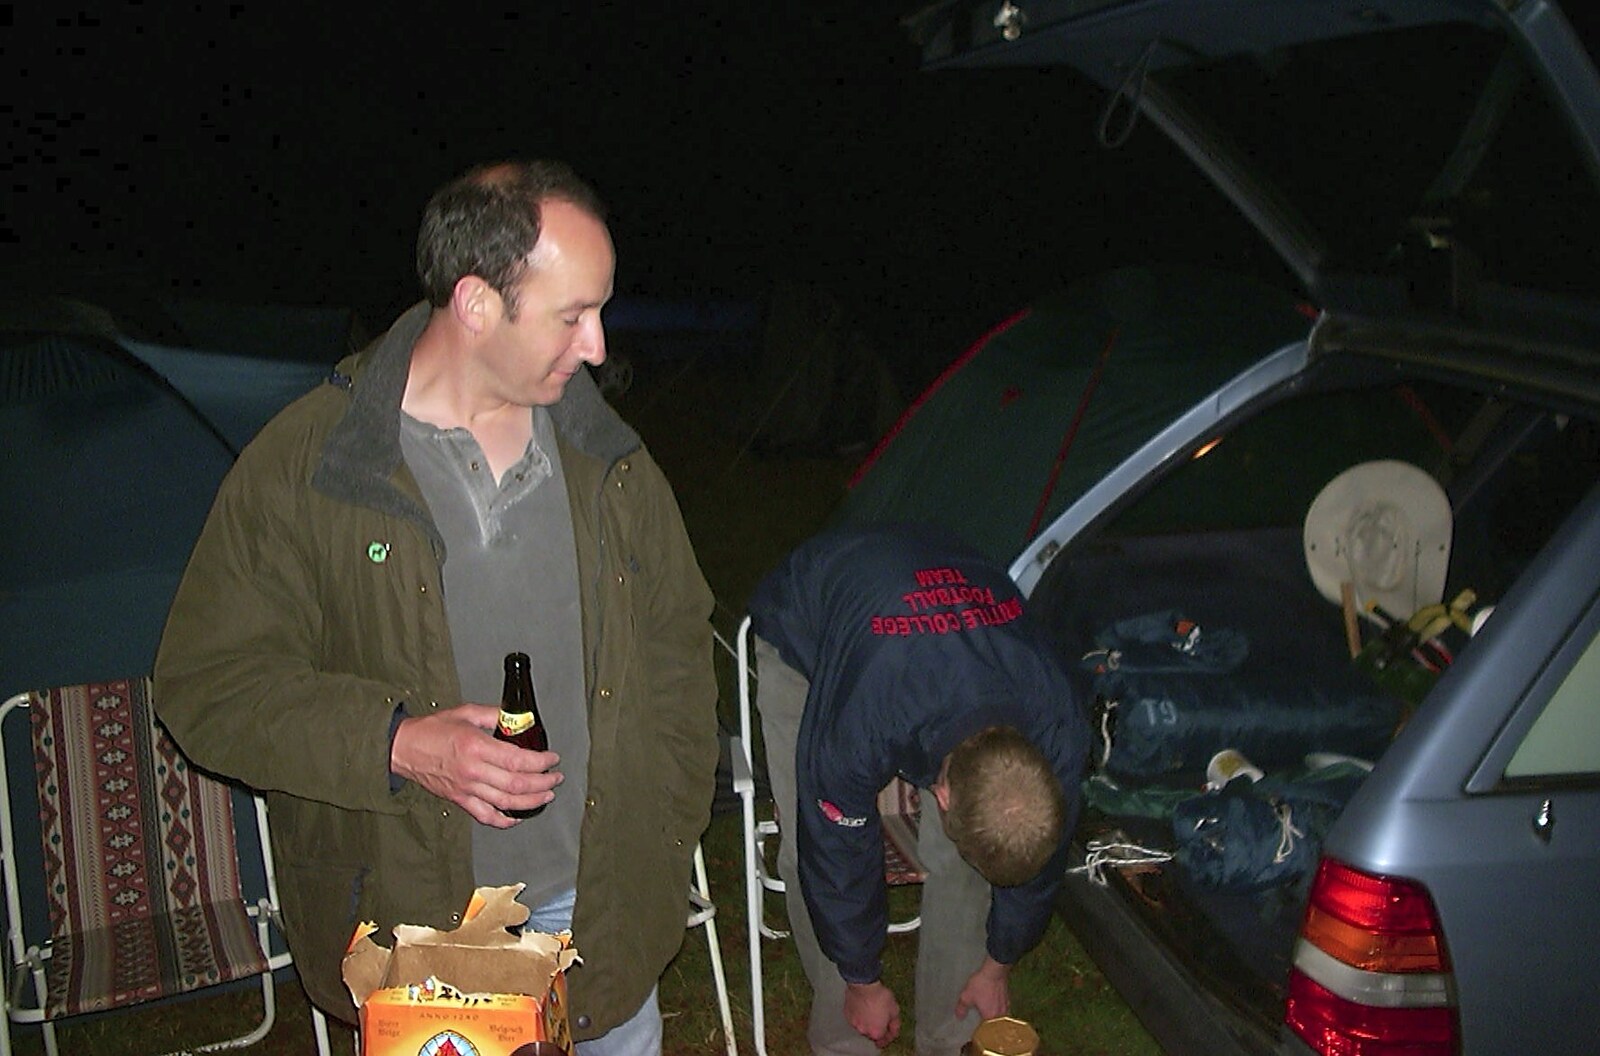 DH and a bottle of Leffe from a recent France trip from A BSCC Splinter Group Camping Trip, Shottisham, Suffolk - 13th August 2004